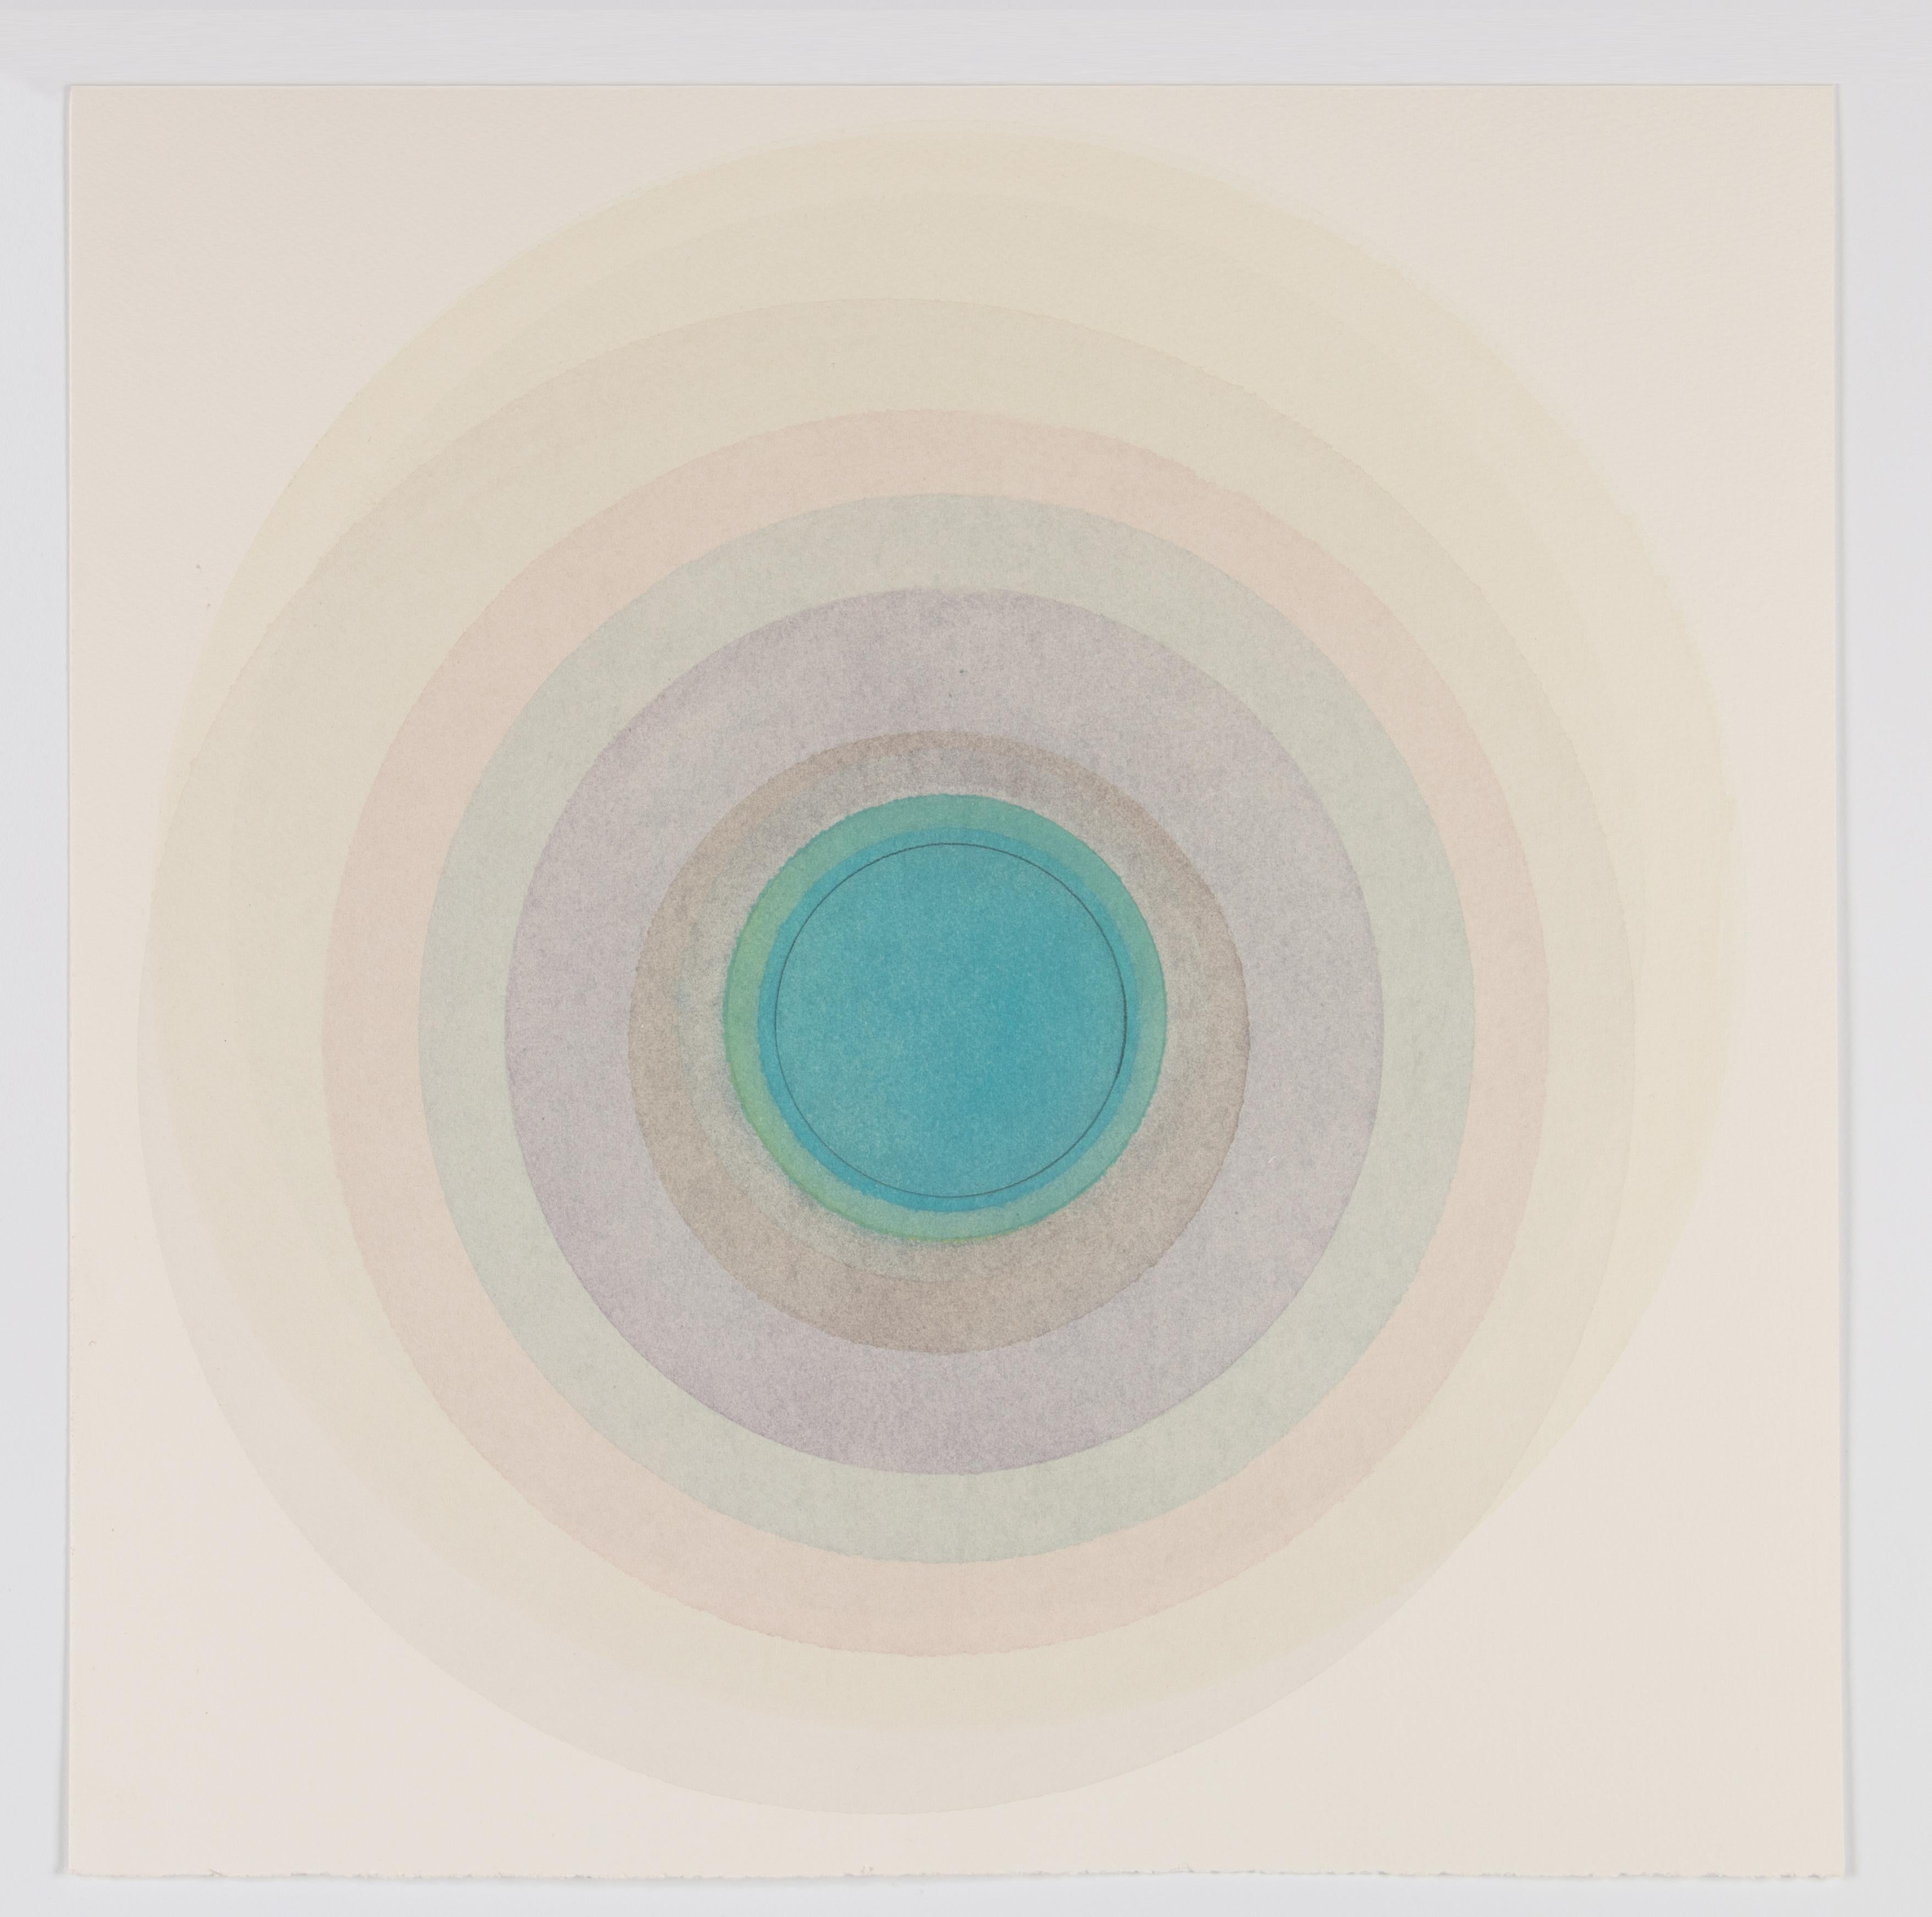 Coaxist 10819 - Soft pastel color abstract geometric circle watercolor on paper